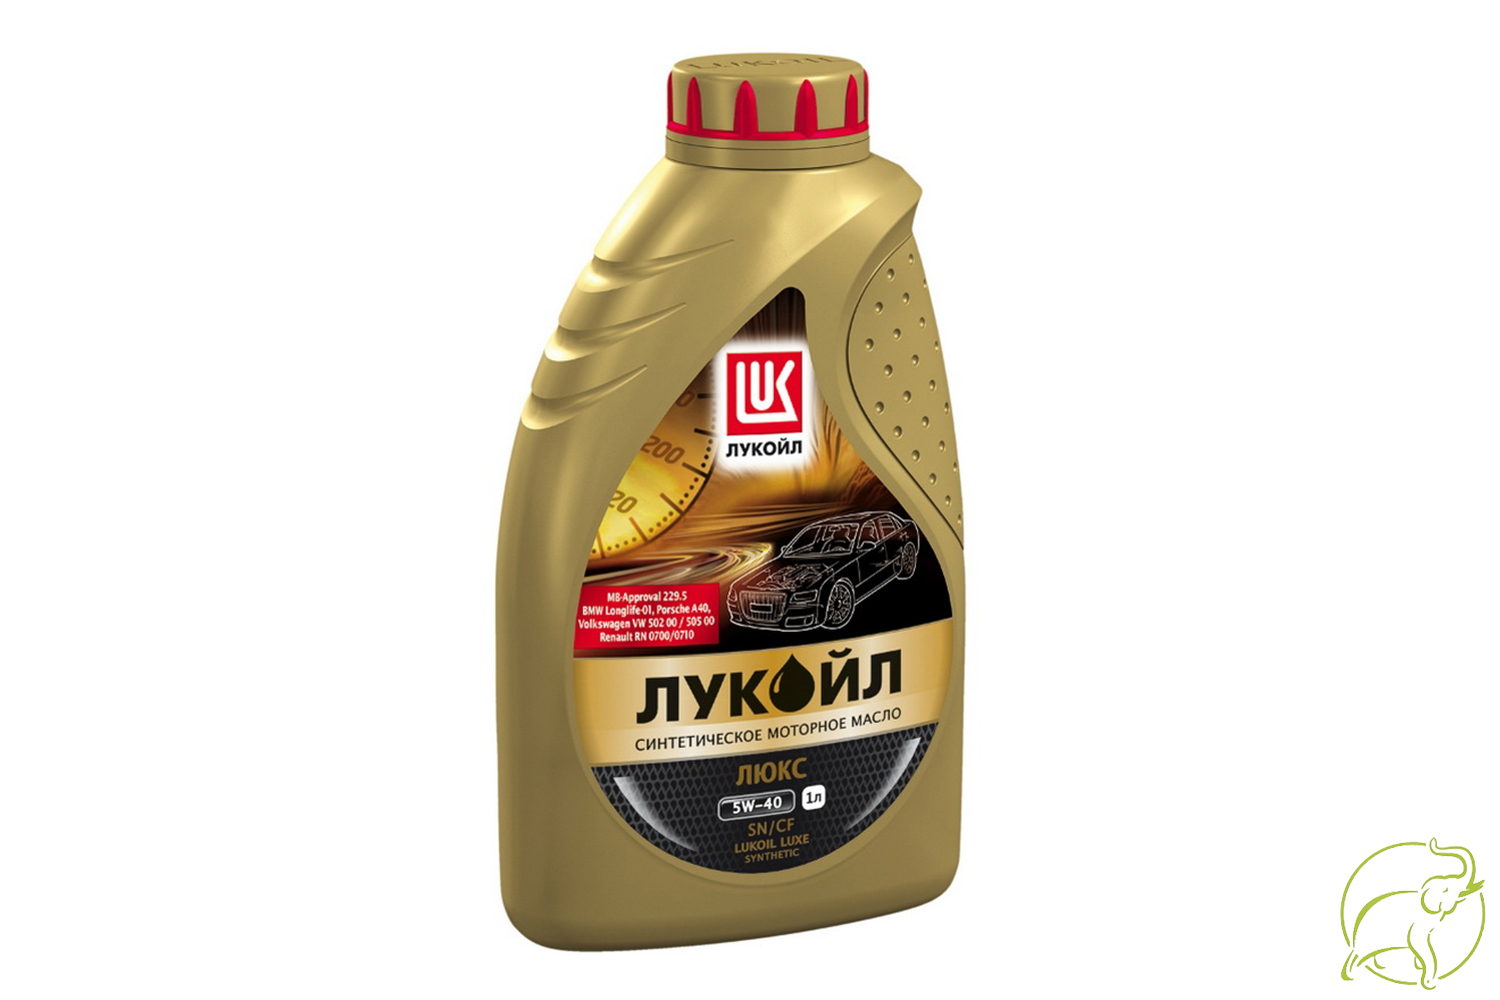 Масло Лукойл Люкс 1л синт 5w40. Lukoil Luxe, Synthetic SAE 5w-40, API SN/CF. Масло моторное Лукойл Люкс синтетическое SAE 5w-40 API SN/CF. Масло Лукойл Люкс моторное синтетич.SAE 5w40 1л.